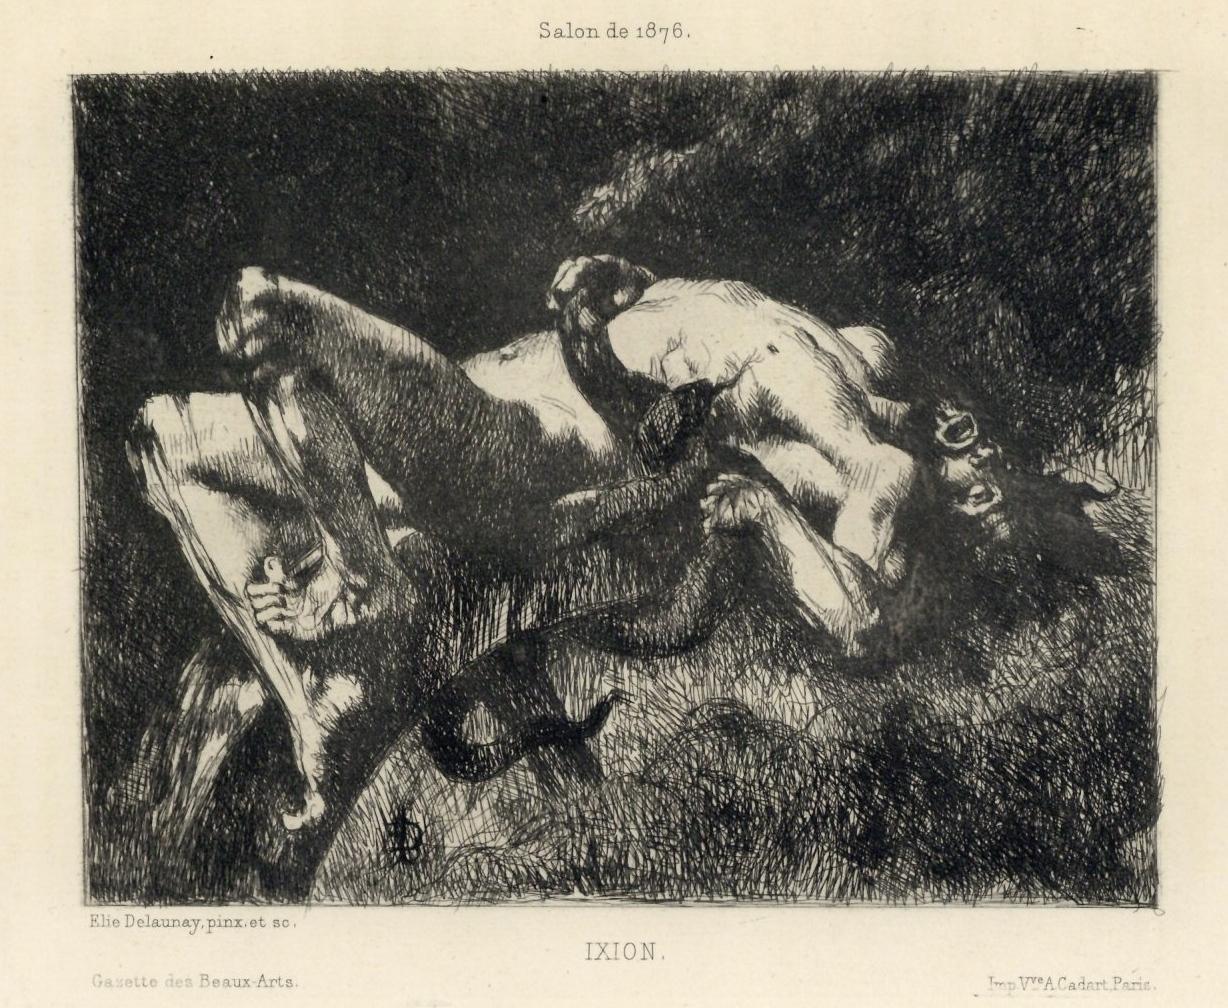 "Ixion" original etching - Print by Jules Elie Delaunay